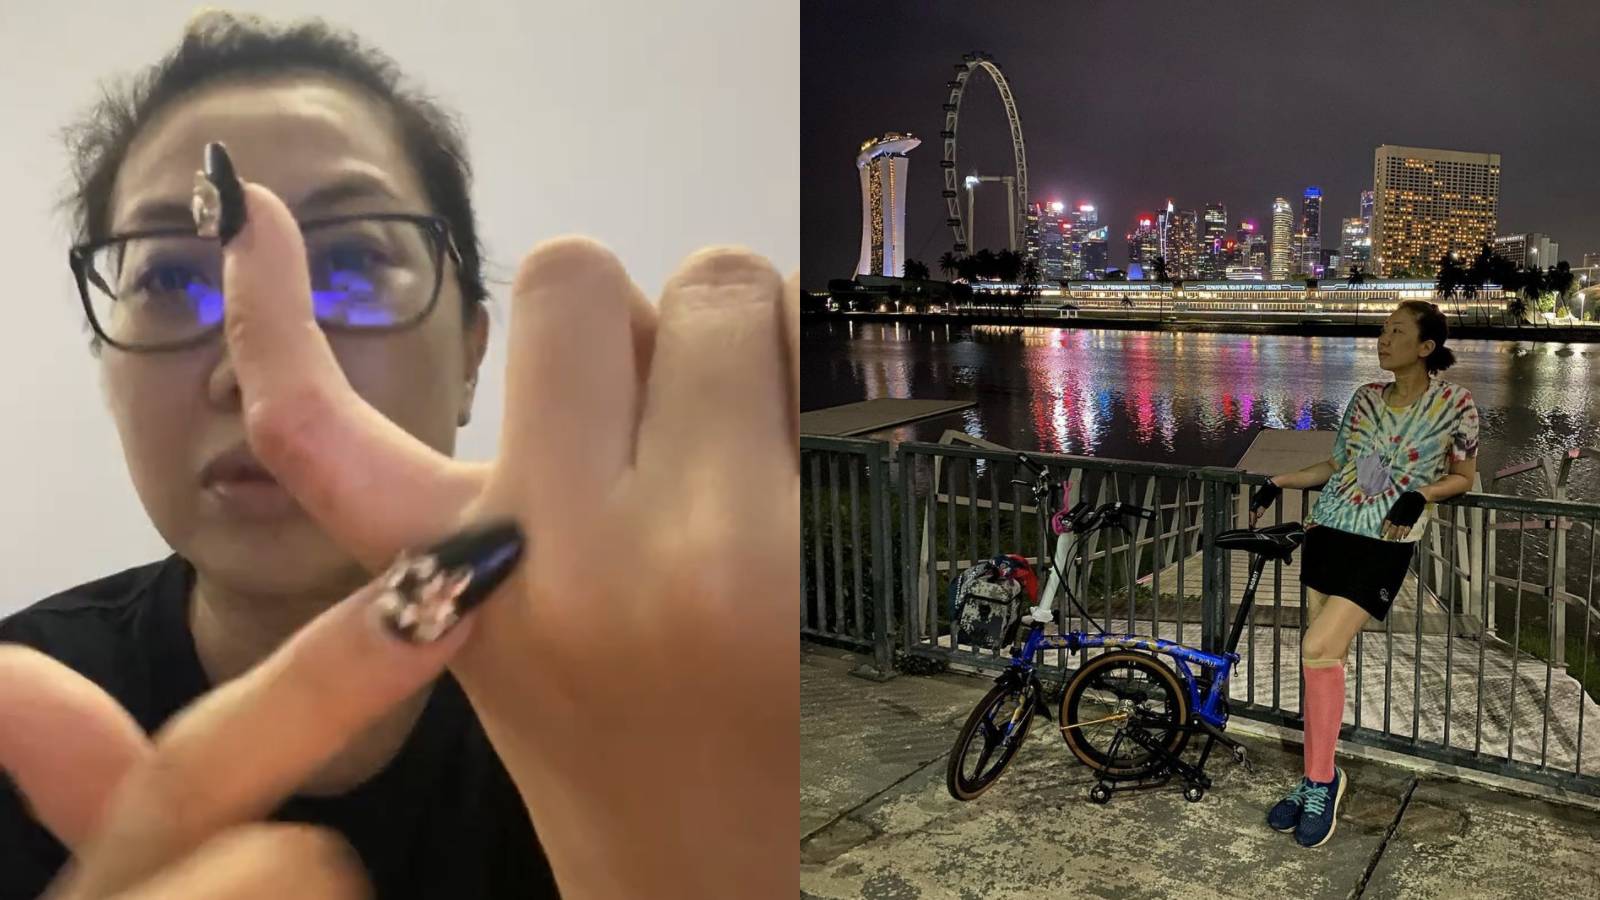 Patricia Mok Got Into A Collision With A Cyclist; Says She Avoided Serious Injury ’Cos Of Her “Years Of Doing Stunts For Charity Shows”